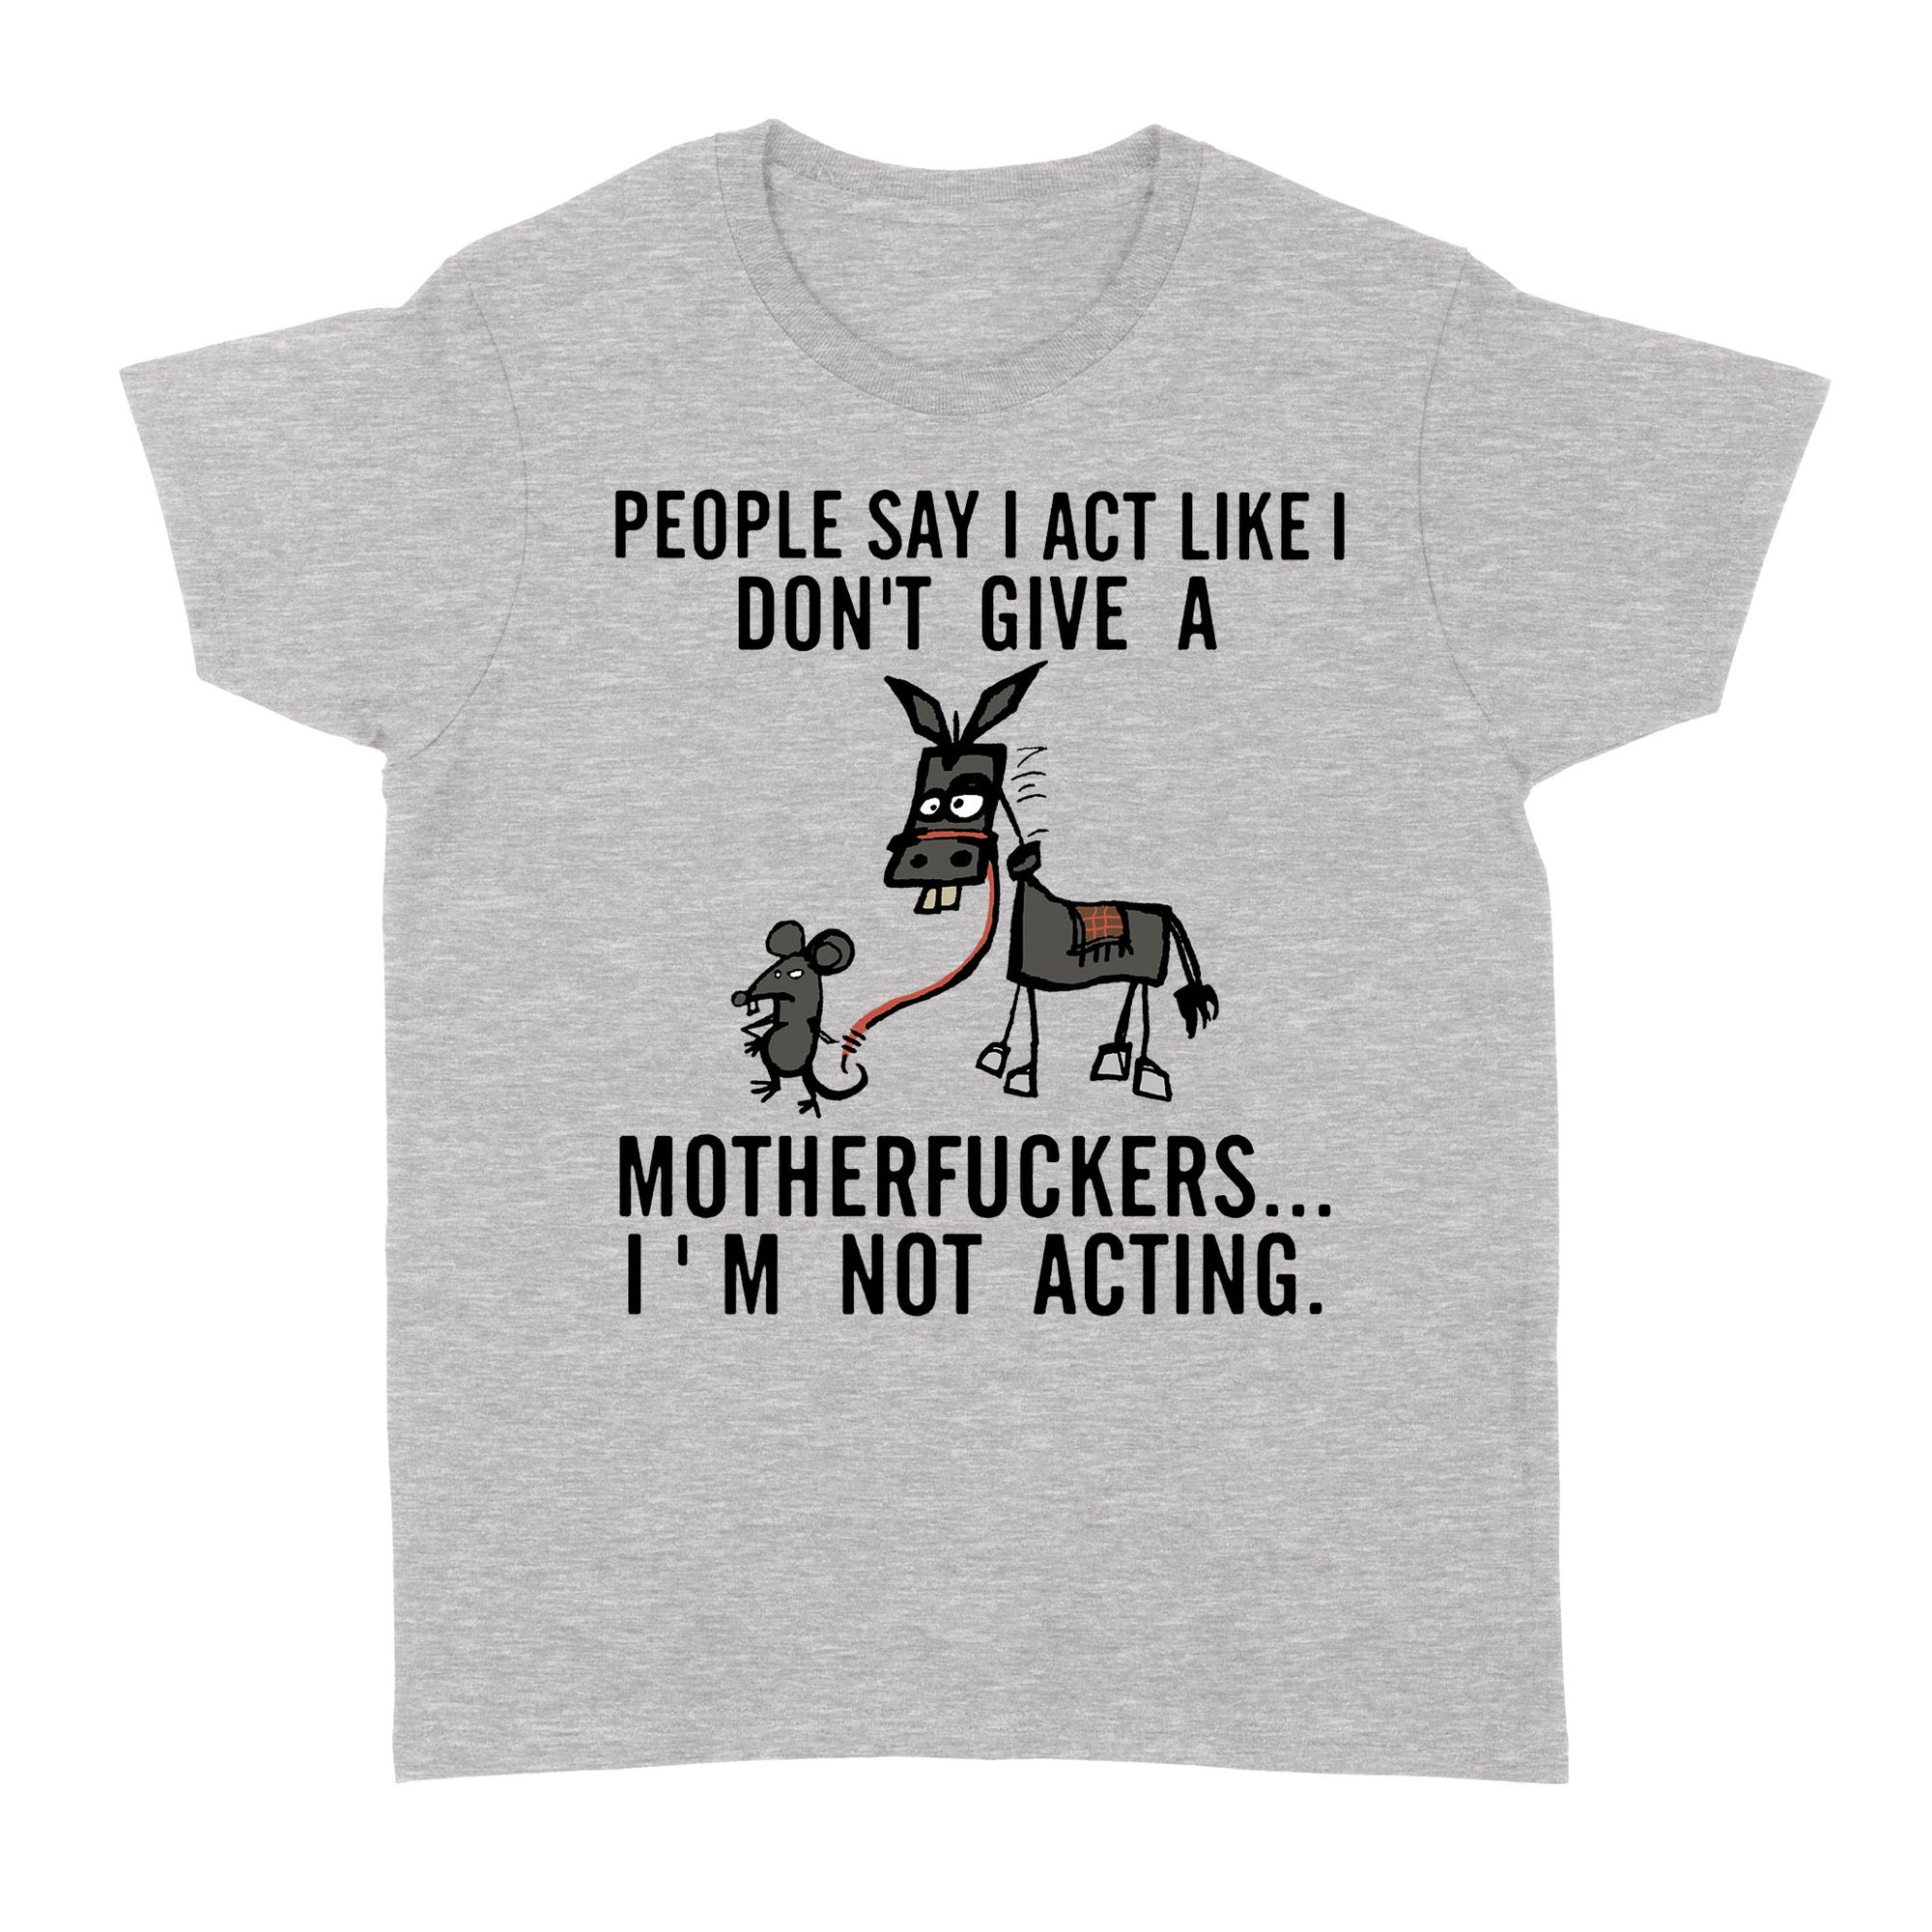 I Act Like I Don t Give A I Am Not Acting Donkey Mouse Jackass Funny Sarcasm Humor Gift Ideas for Him Her Women Men - Standard Women's T-shirt